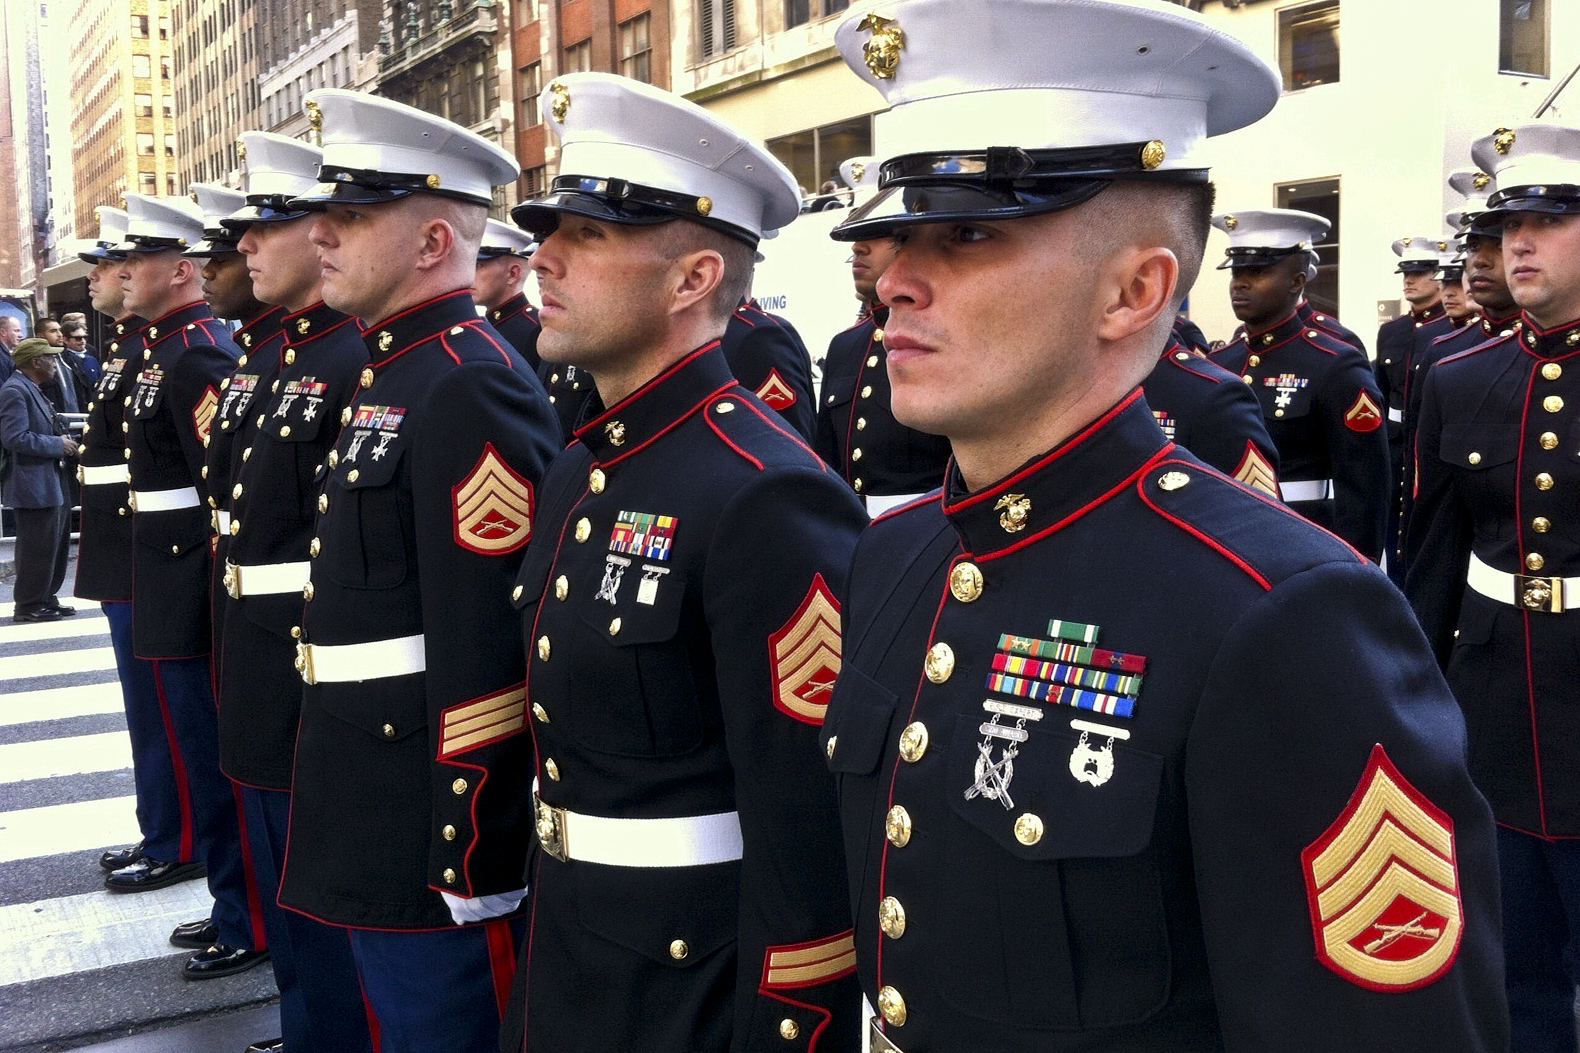 DVIDS - Images - Marines march in 2011 New York Veterans Day Parade [Image  5 of 10]